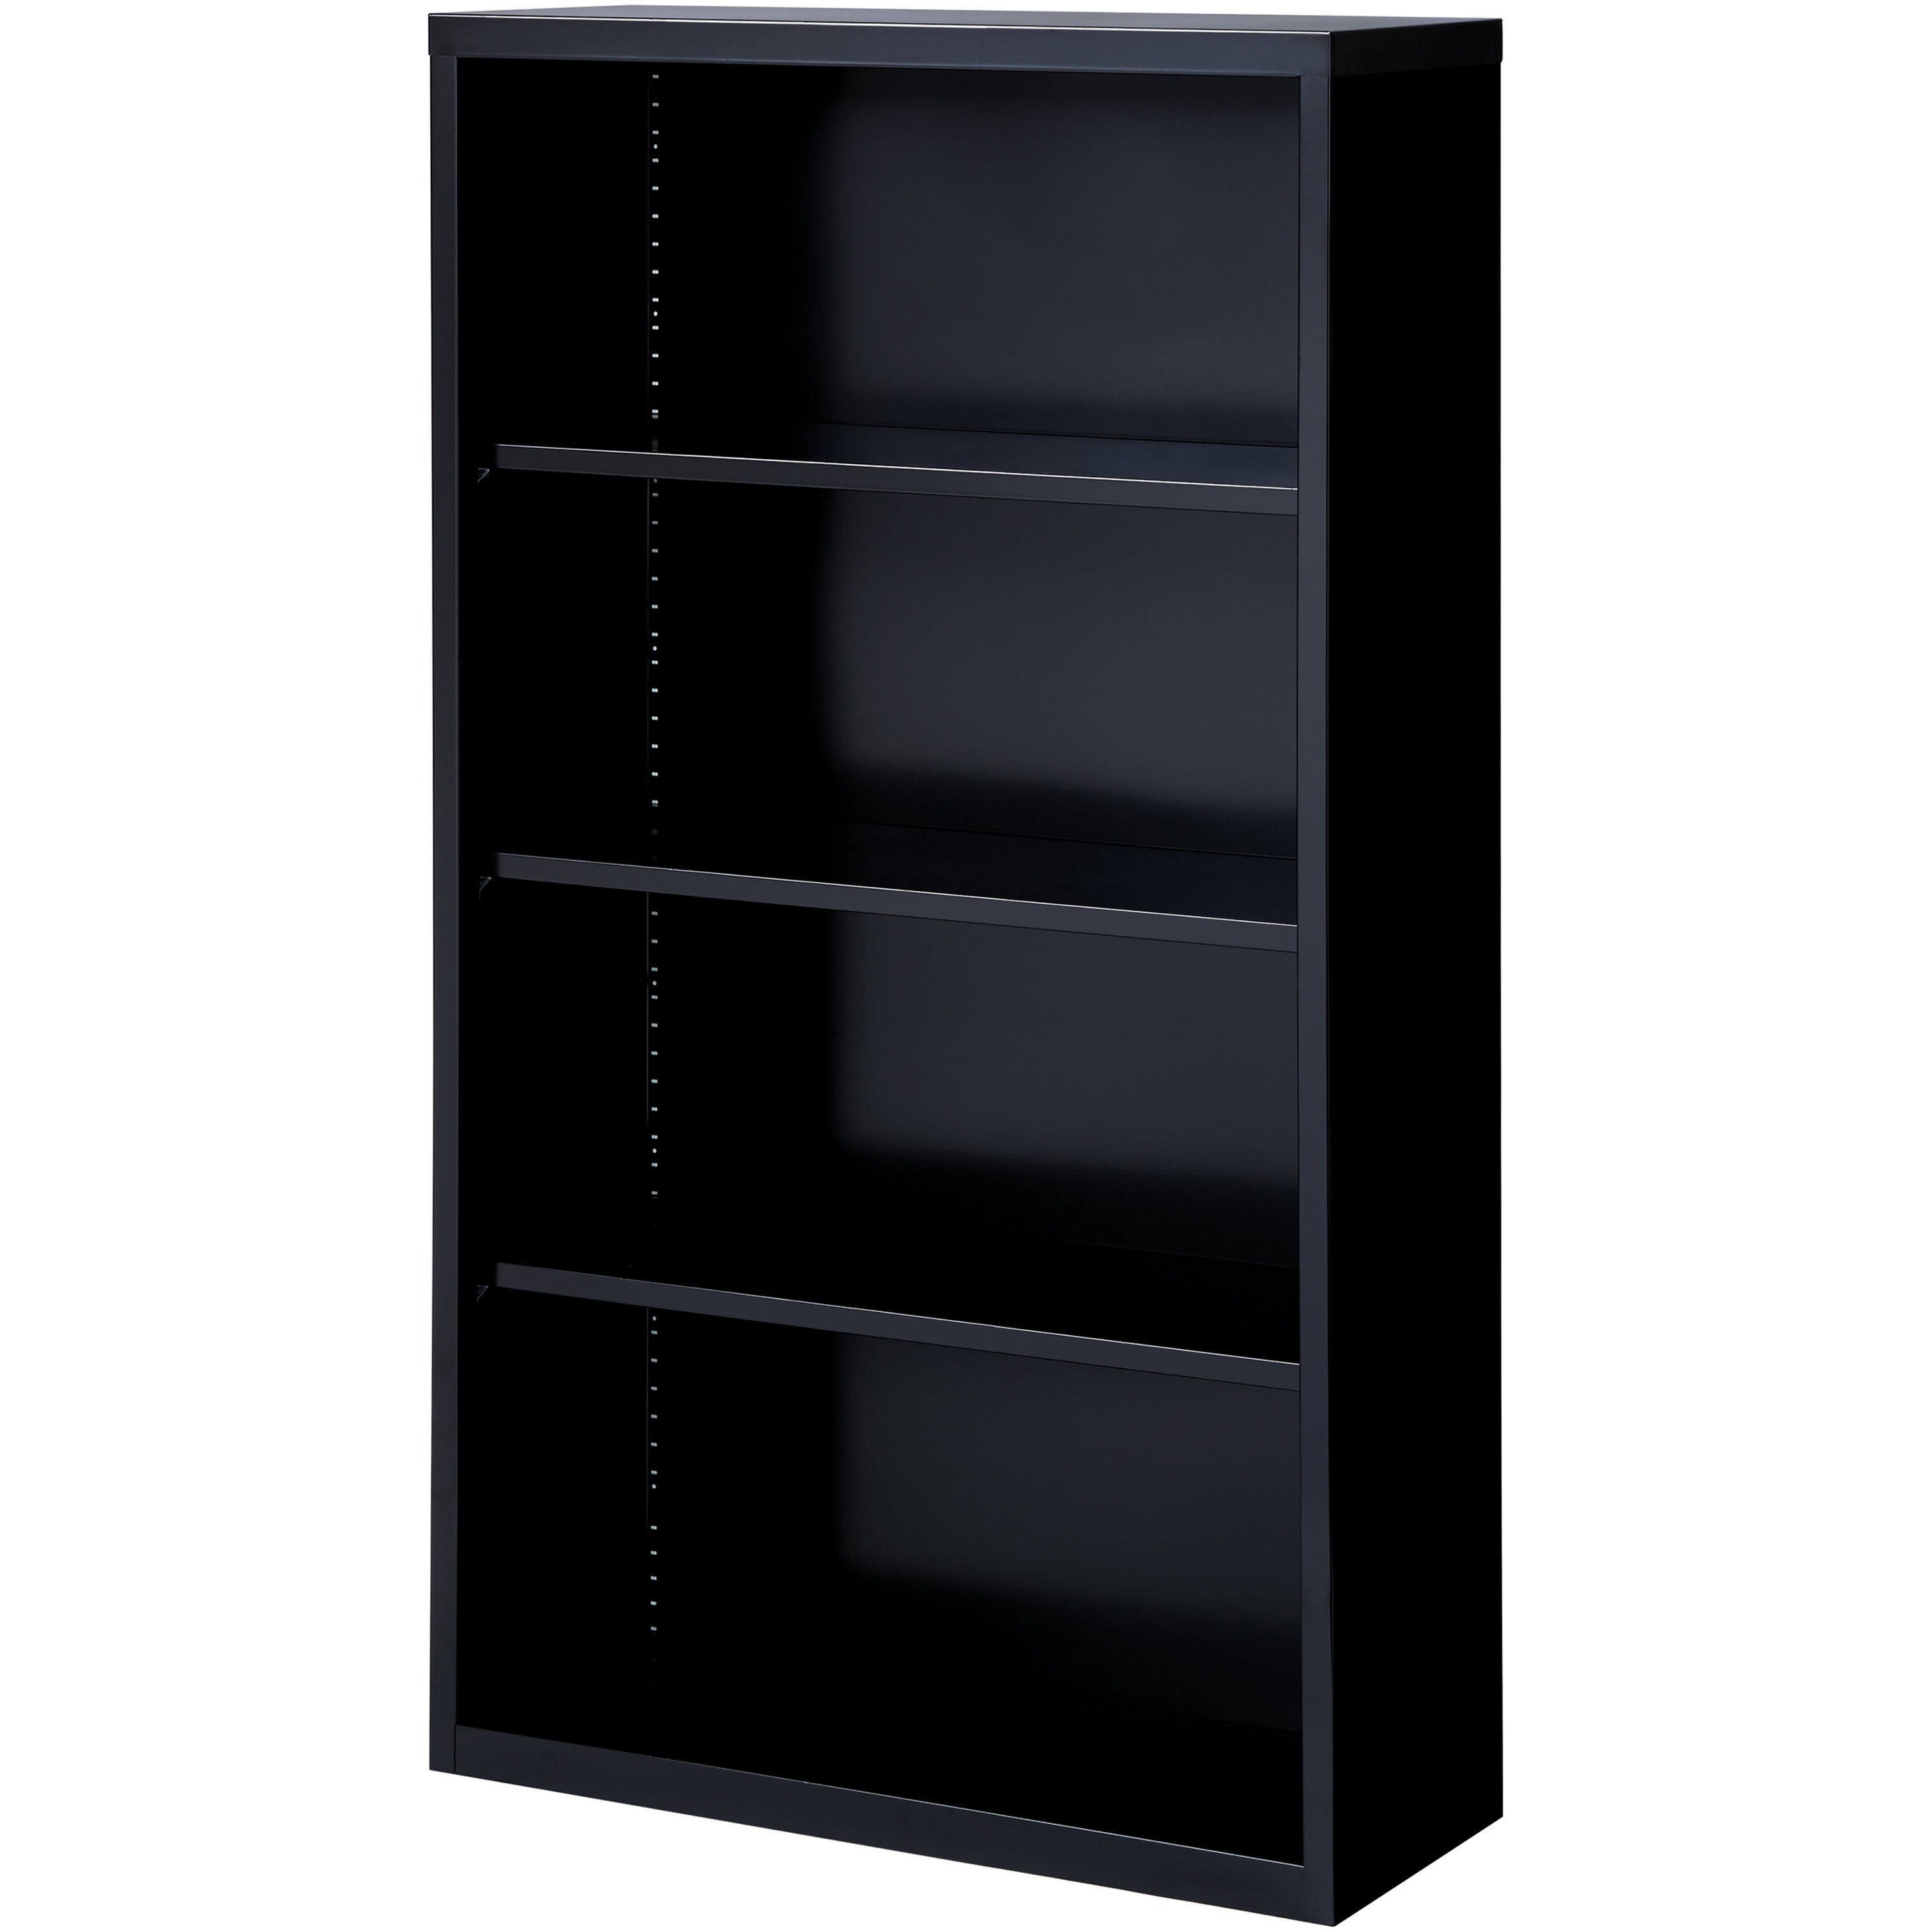 Lorell Fortress Series Bookcase - 34.5" x 13" x 60" - 4 x Shelf(ves) - Black - Powder Coated - Steel - Recycled - 